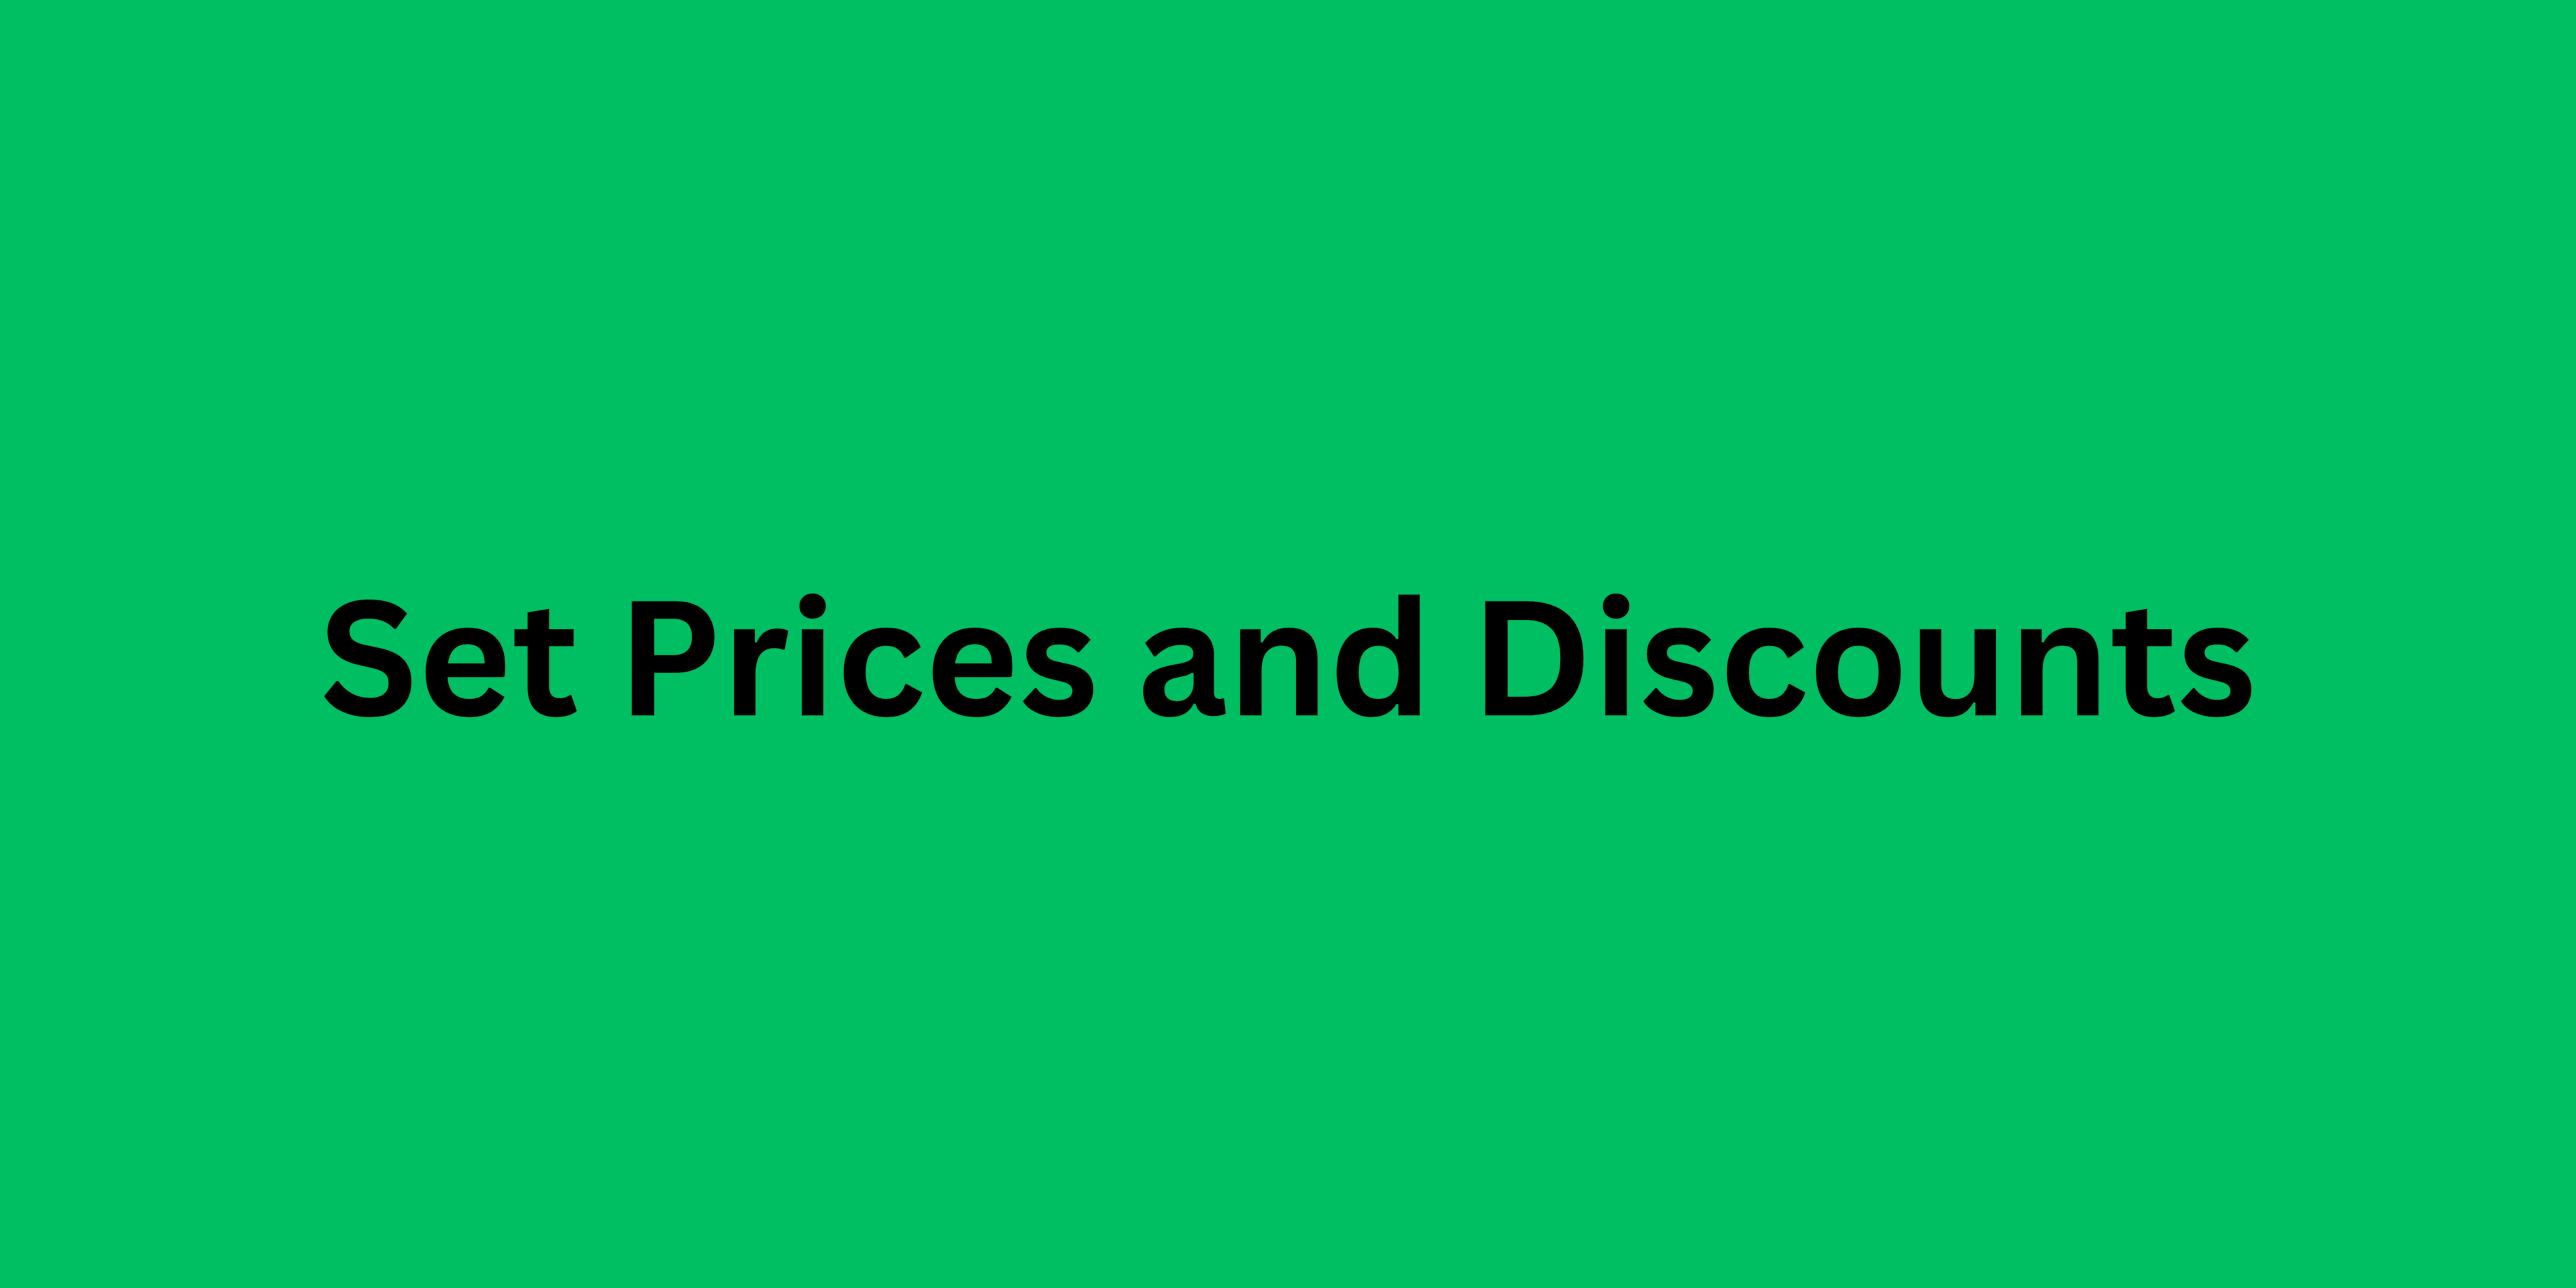 Set Prices and Discounts